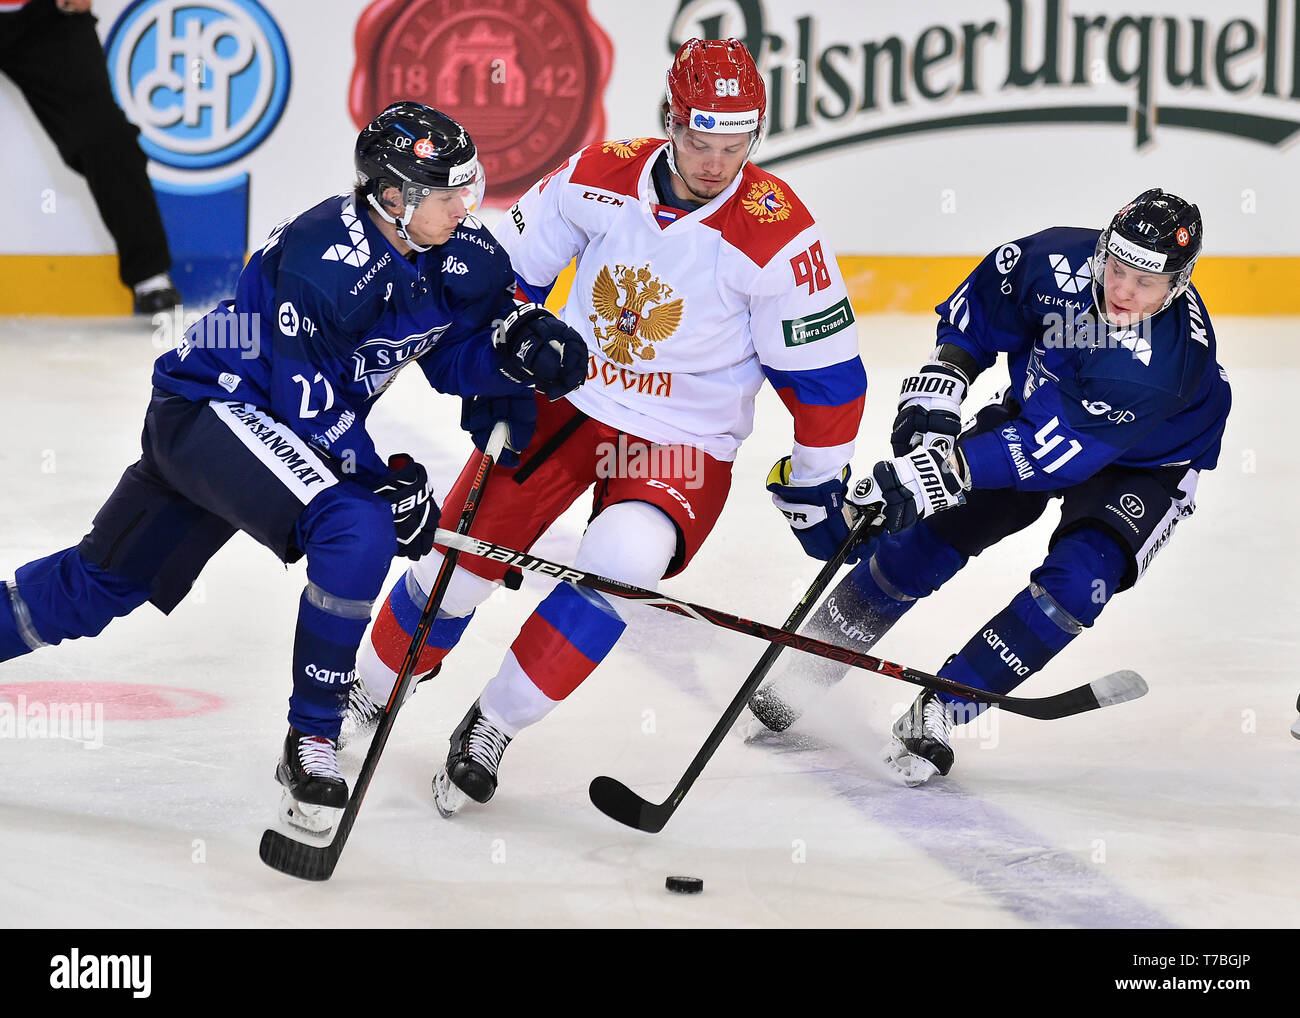 Brno, Czech Republic. 04th May, 2019. L-R Eetu Luostarinen (FIN), Mikhail Sergachyov (RUS) and Joel Kiviranta (FIN) in action during the Russia vs Finland match within Carlson Hockey Games tournament, part of Euro Hockey Tour in Brno, Czech Republic, May 4, 2019. Credit: Lubos Pavlicek/CTK Photo/Alamy Live News Stock Photo